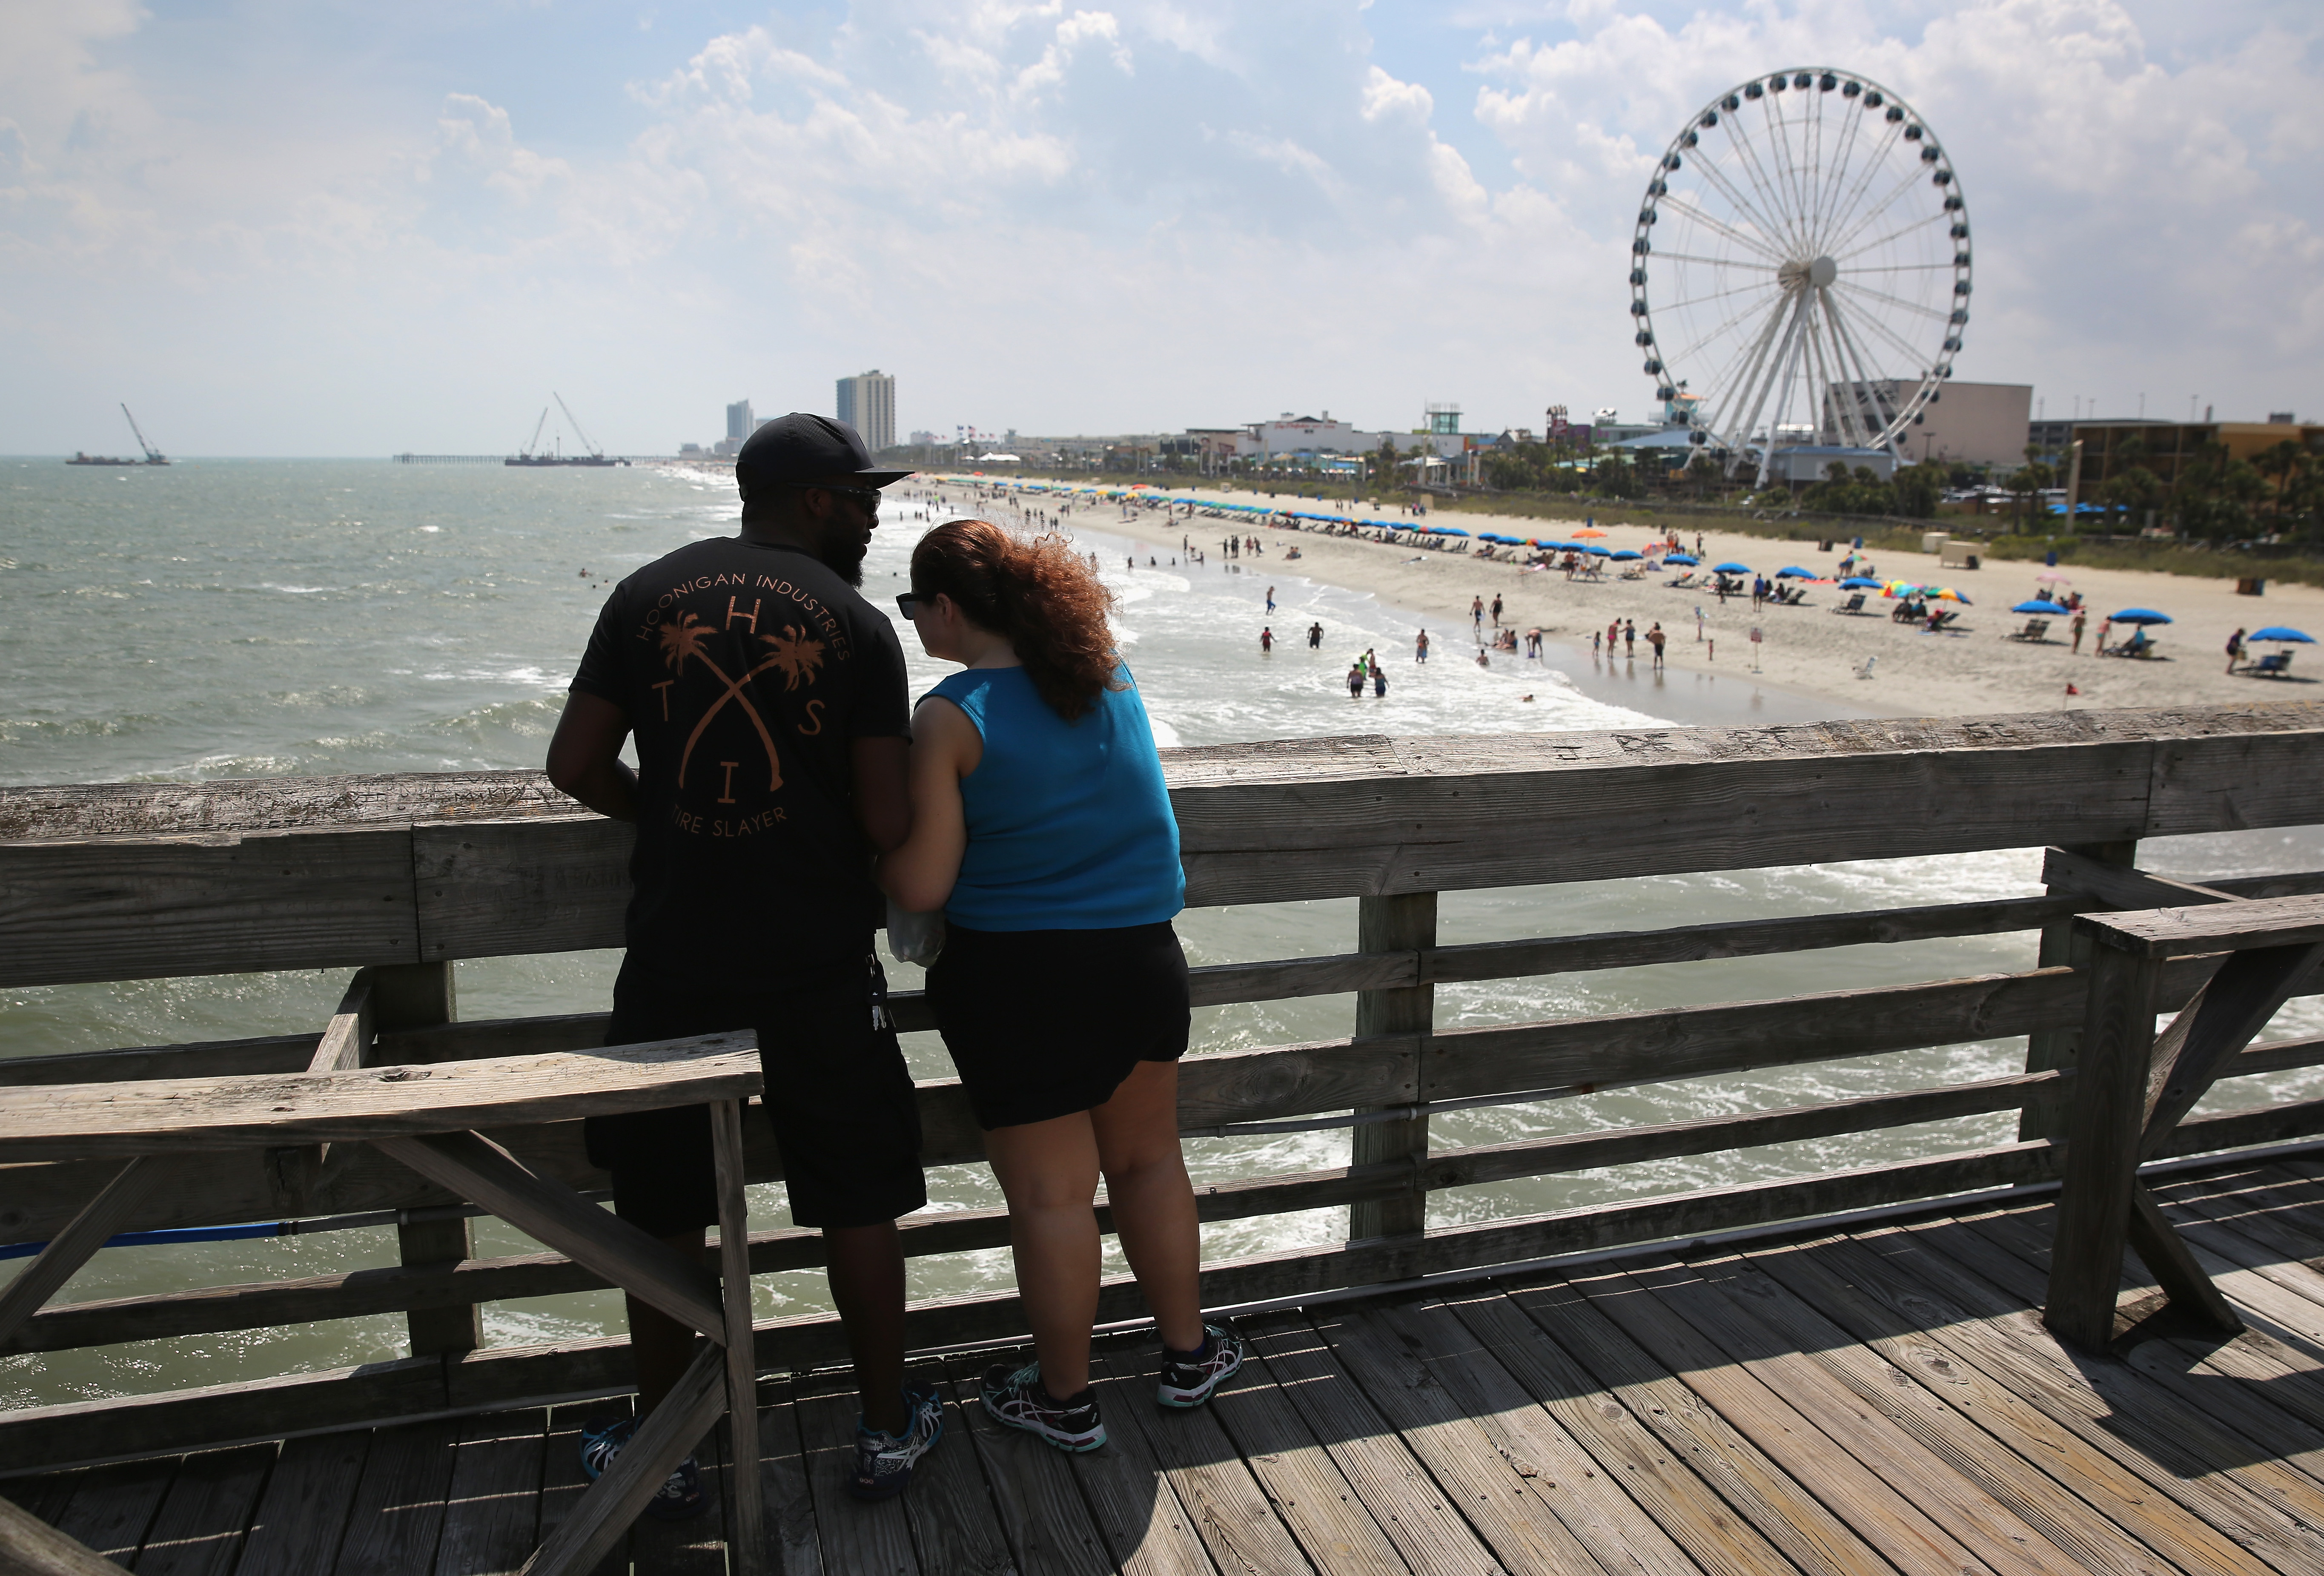 A couple stands on a pier overlooking the beach and the SkyWheel on July 13, 2015 in Myrtle Beach, South Carolina. The 187 foot tall ferris wheel, built in 2011, is the biggest east of the Mississippi River and dominates the skyline of the tourist beach destination. The “Grand Strand” beach stretches almost uninterupted for more than 60 miles of Atlantic coastline and is Myrtle Beach’s top attraction, bringing in millions of tourists each year.